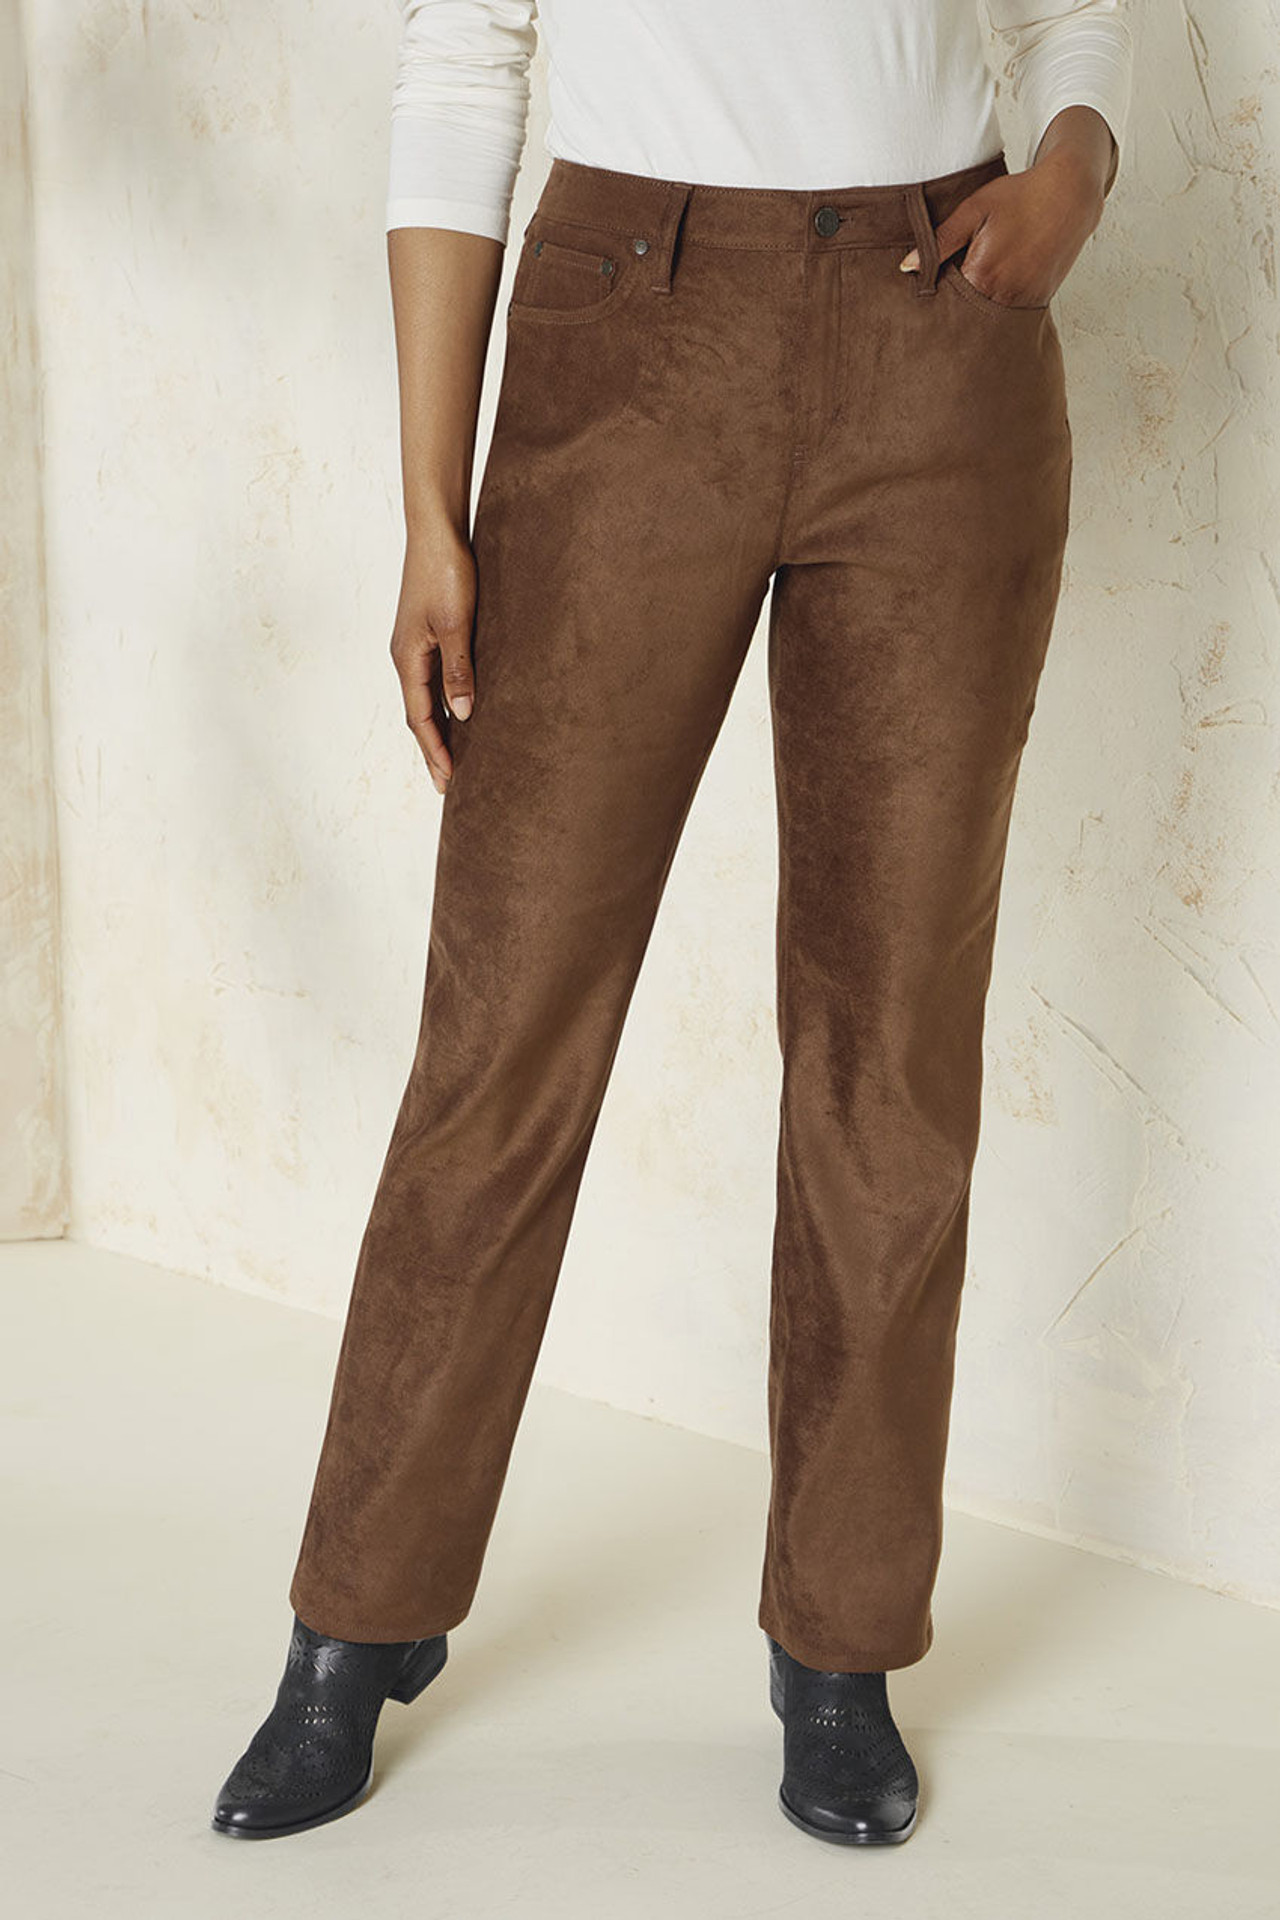 Allegra K Womens Casual Faux Suede Pants High Waist India | Ubuy